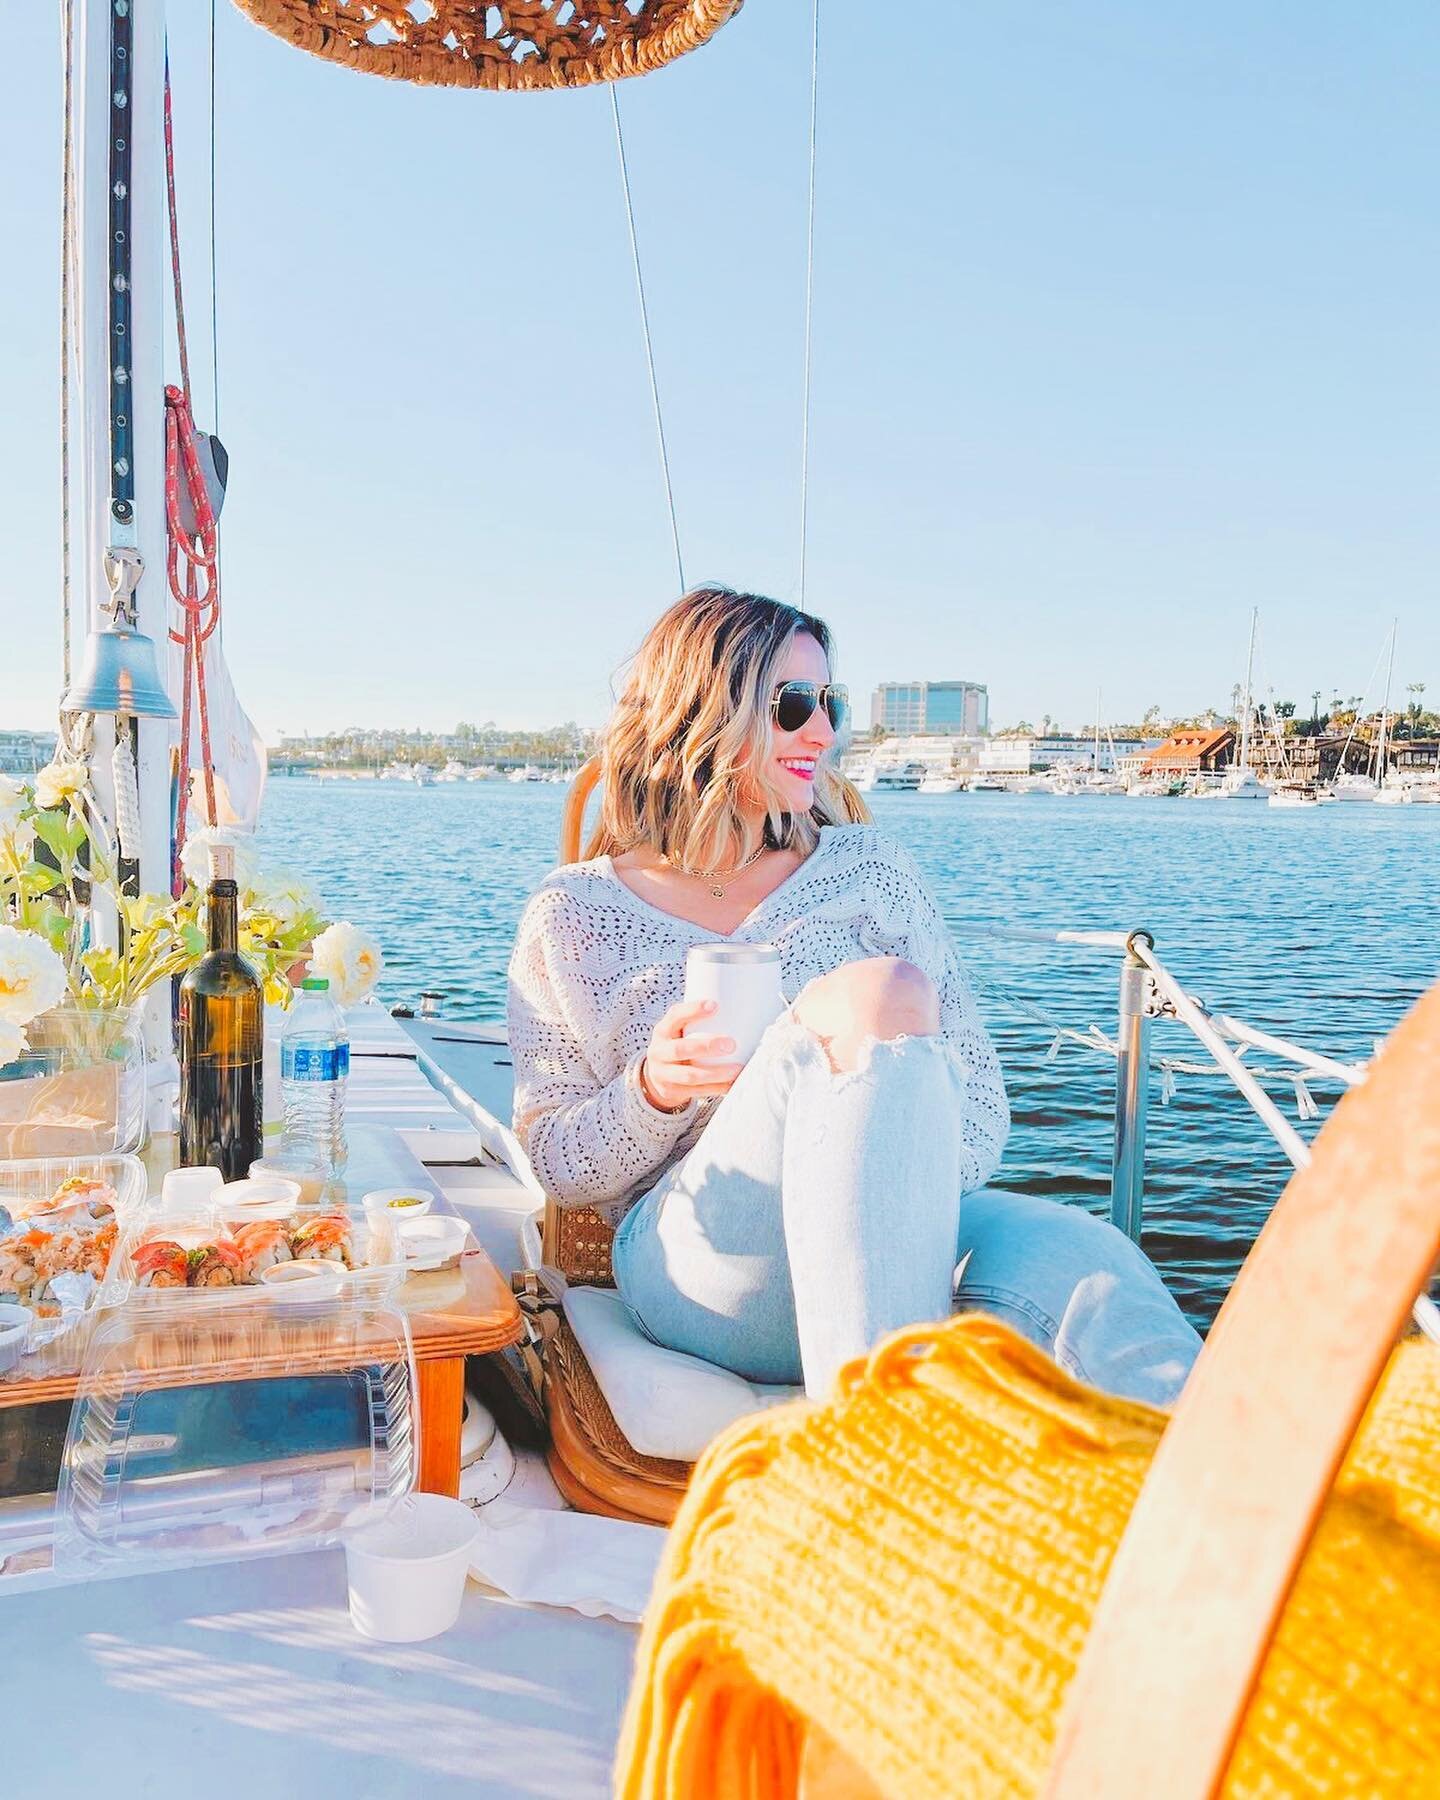 Come enjoy the beautiful weather while cruising in style with us! Book your cruise now at www.theboatpeoplecruise.com #boatcruise #newportbeachca #sunsetcruise #datenight #proposalideas #girlsnightout #datenightideas #visitnewportbeach #sailboat #fri